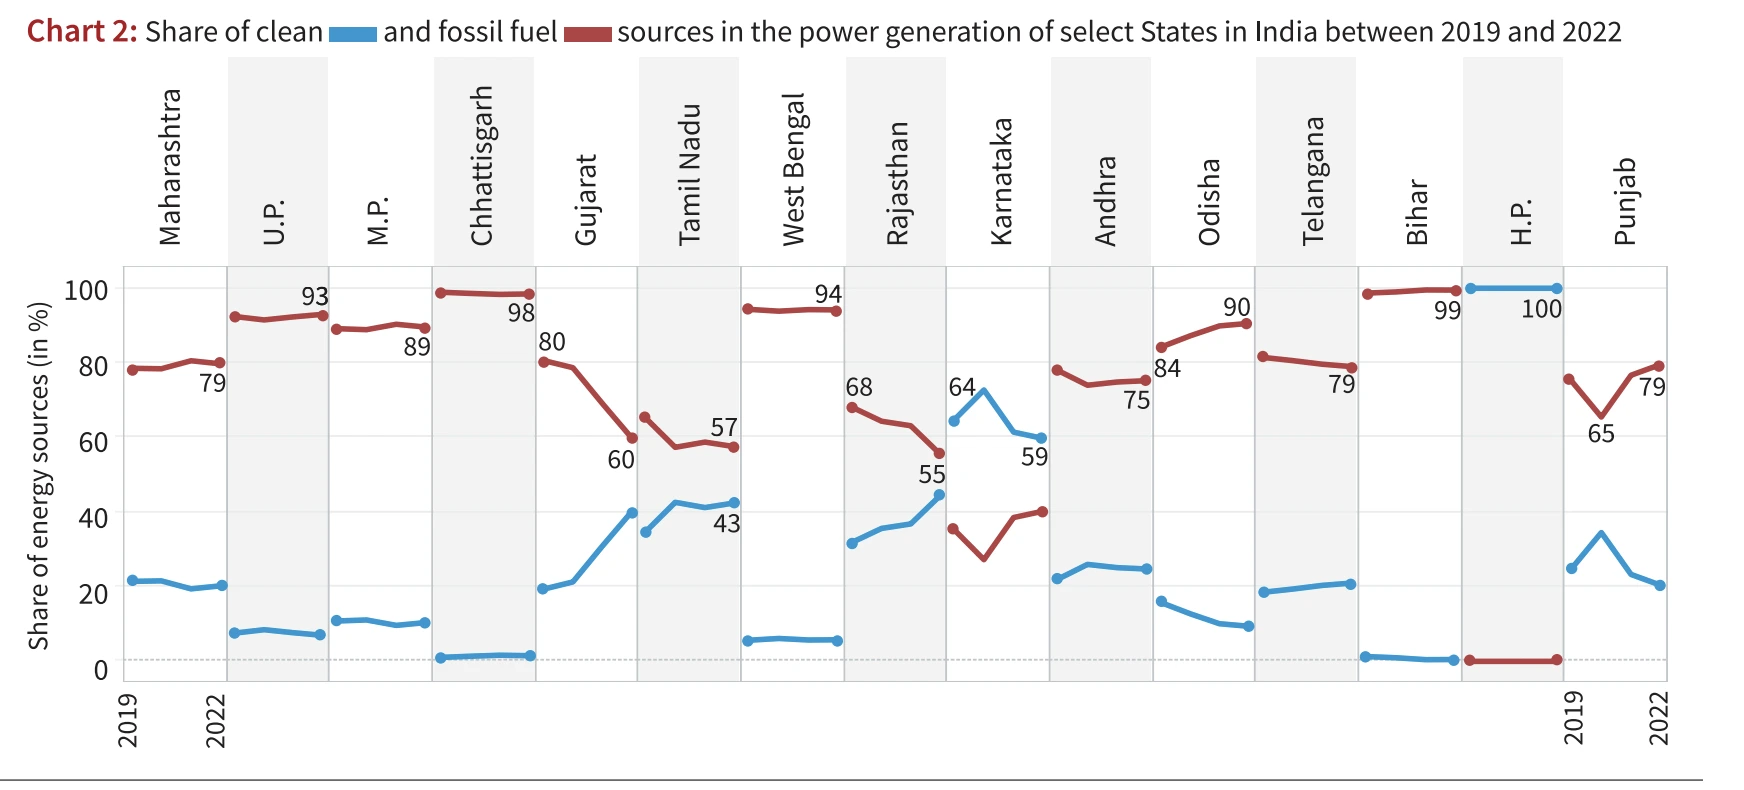 Power Generation Trends in Select Indian States